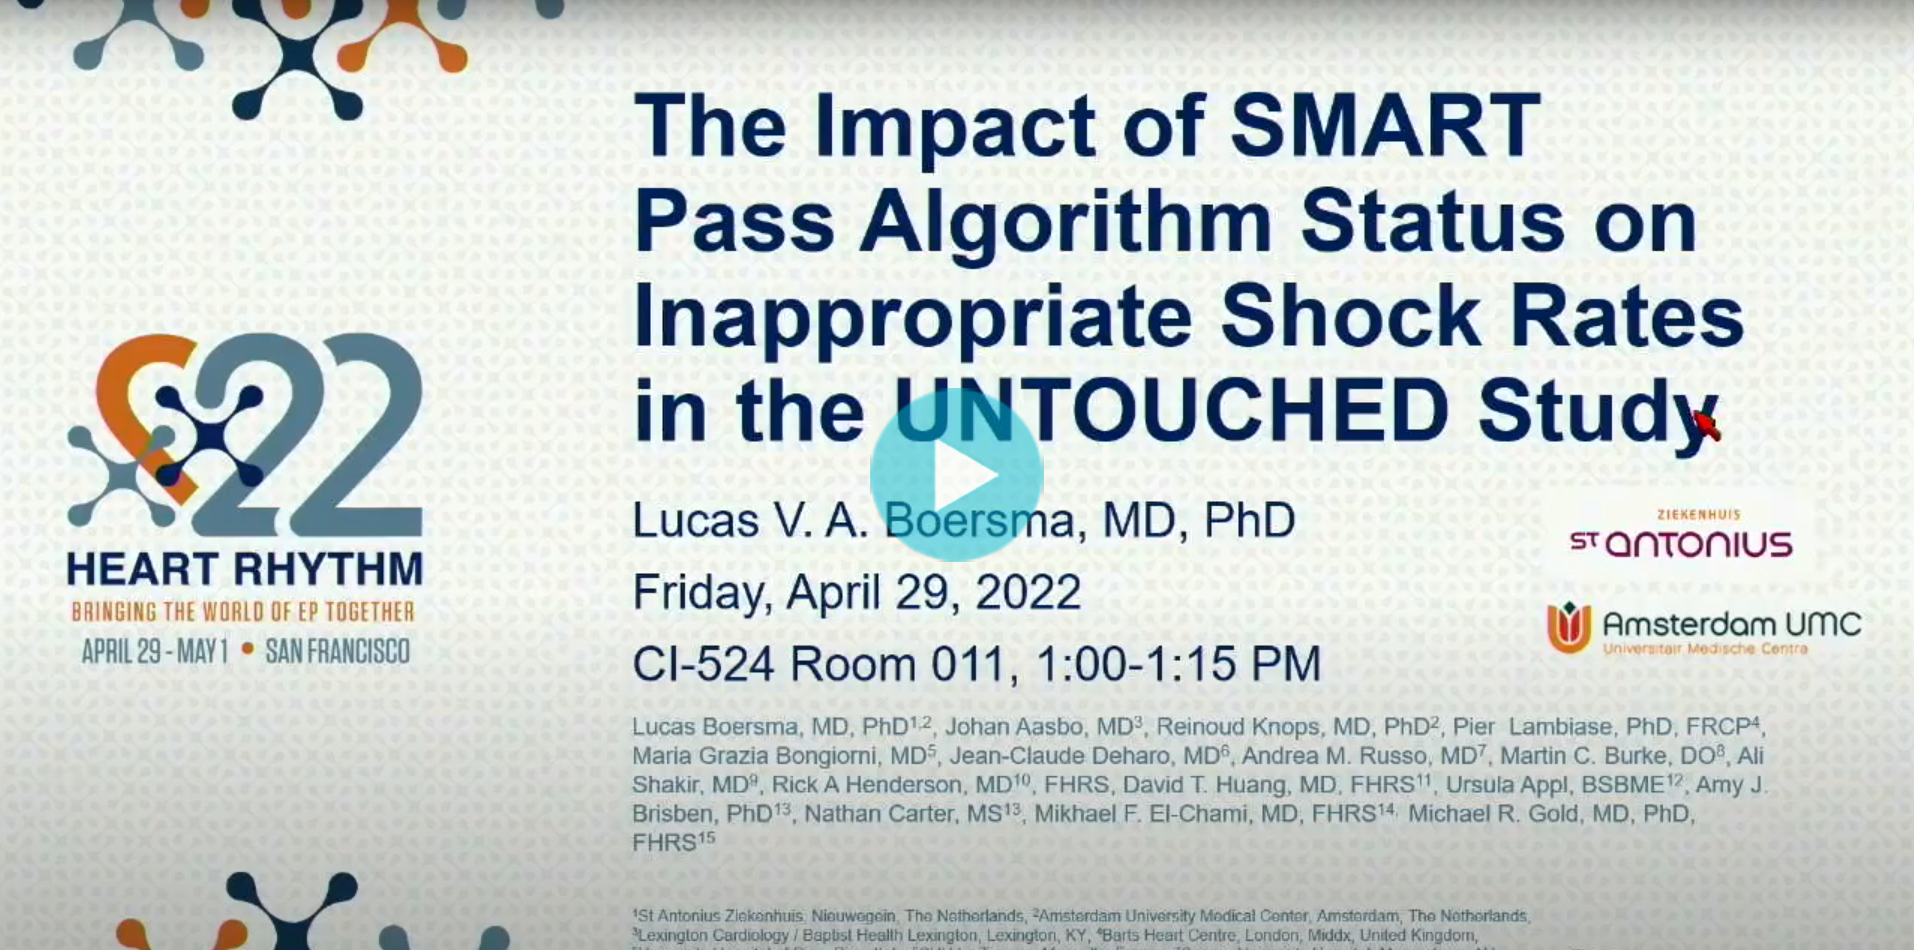 The Impact of SMART Pass Algorithm Status on Inappropriate Shock Rates in the UNTOUCHED Study.